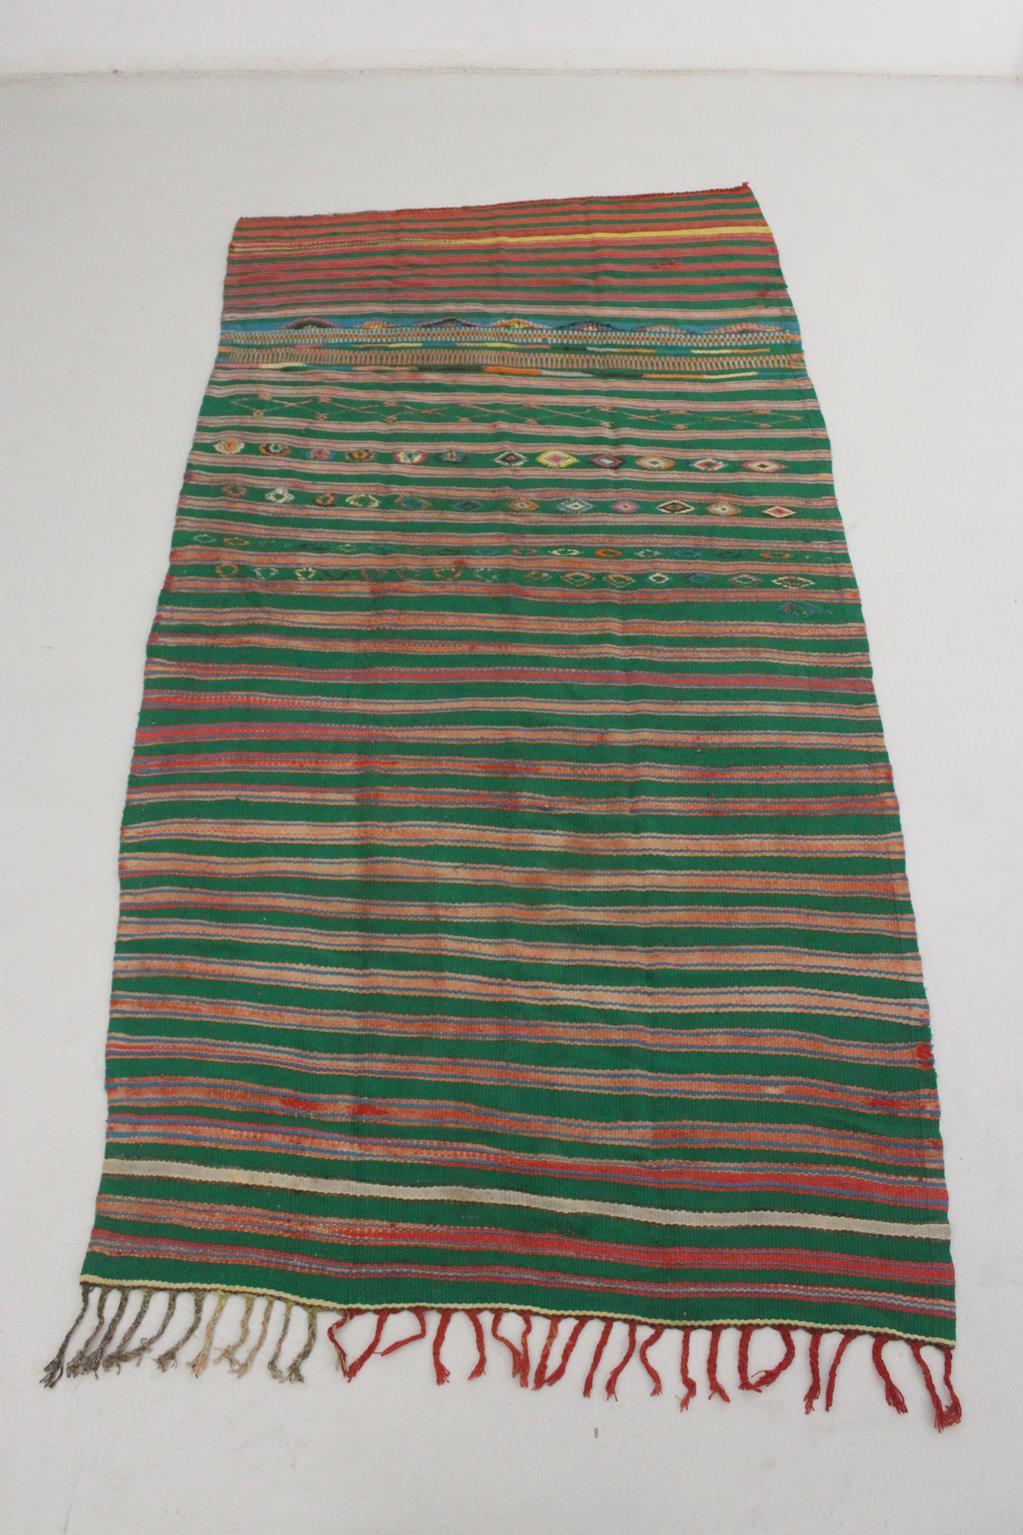 Vintage Moroccan striped kilim rug - Green/pink/red - 5.1x10.2feet / 157x312cm For Sale 7